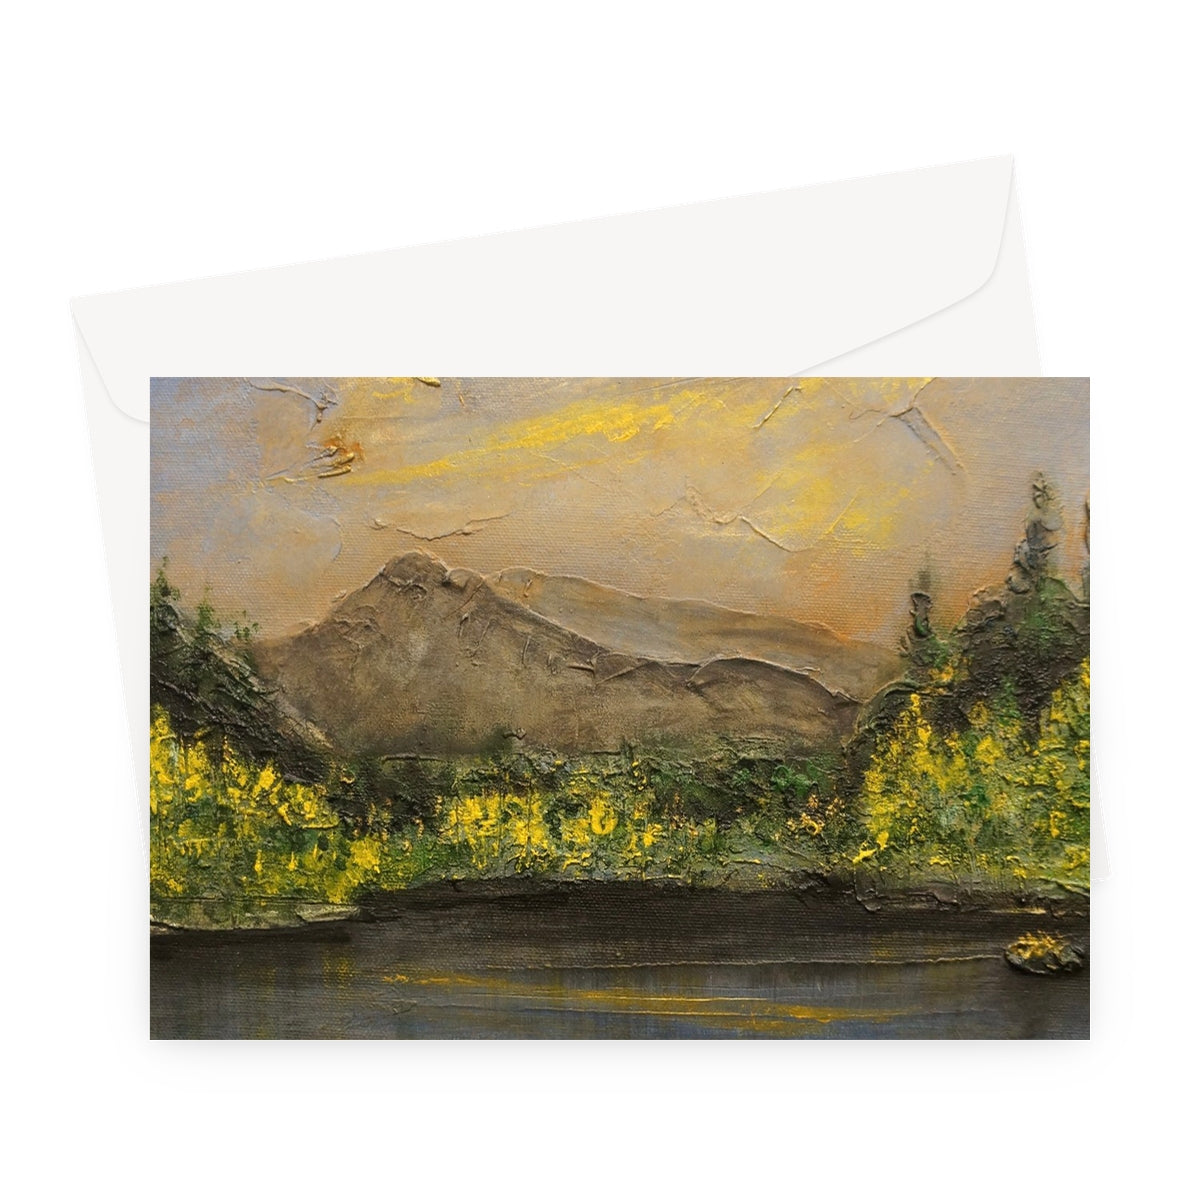 Glencoe Lochan Dusk Art Gifts Greeting Card-Greetings Cards-Scottish Lochs & Mountains Art Gallery-A5 Landscape-10 Cards-Paintings, Prints, Homeware, Art Gifts From Scotland By Scottish Artist Kevin Hunter